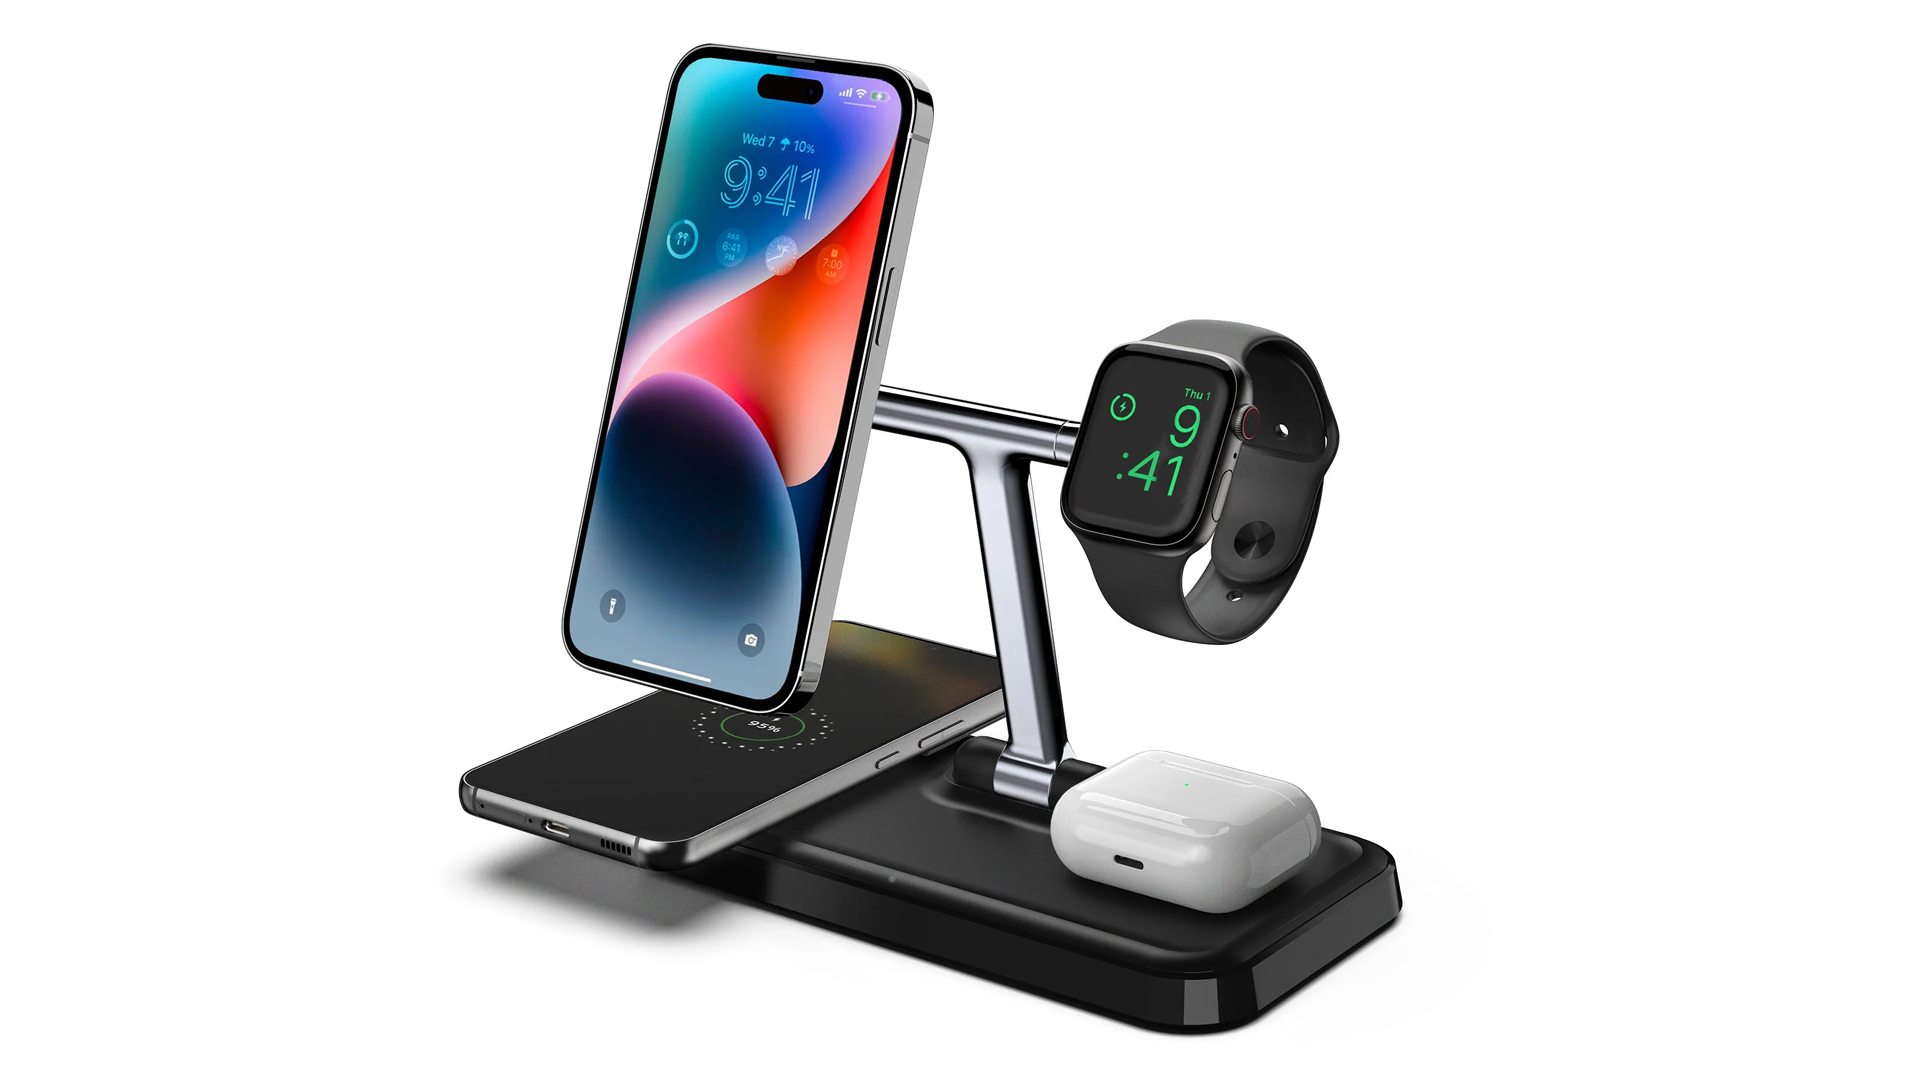 The Hyper Hyperjuice 4 in 1 Wireless Charger